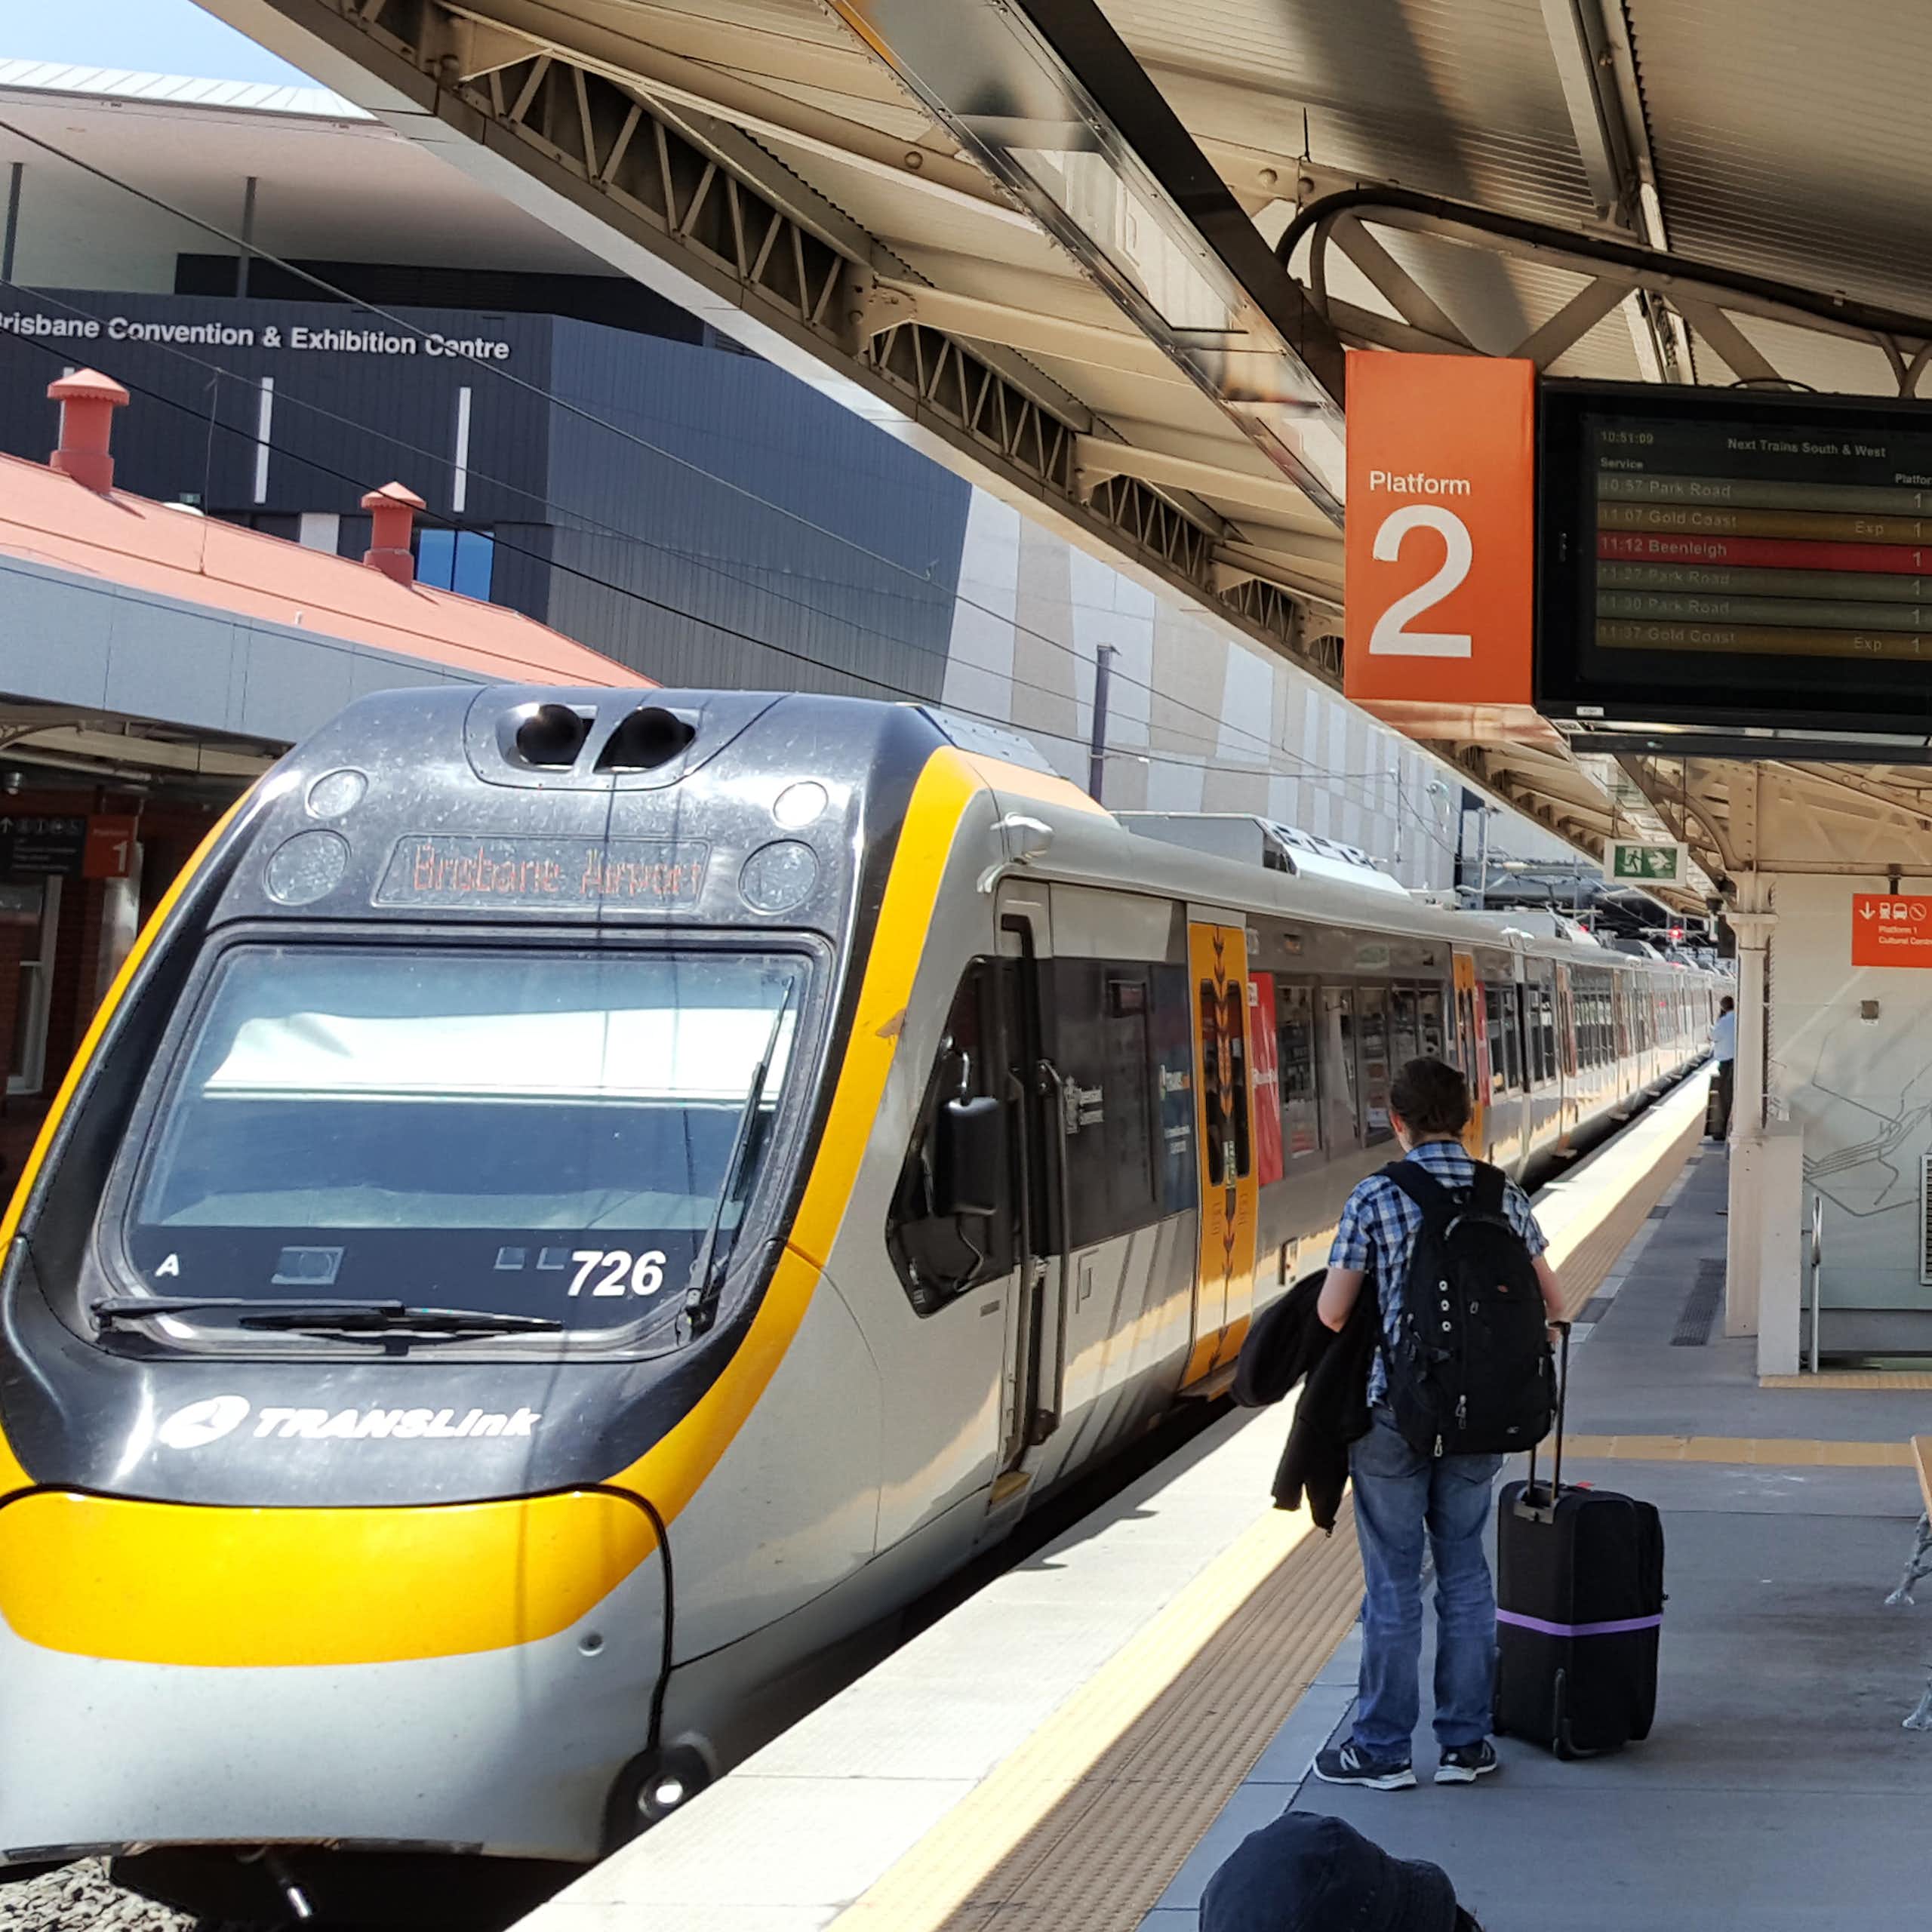 Train pulls into South Brisbane station, man seen waiting on platform with suitcase